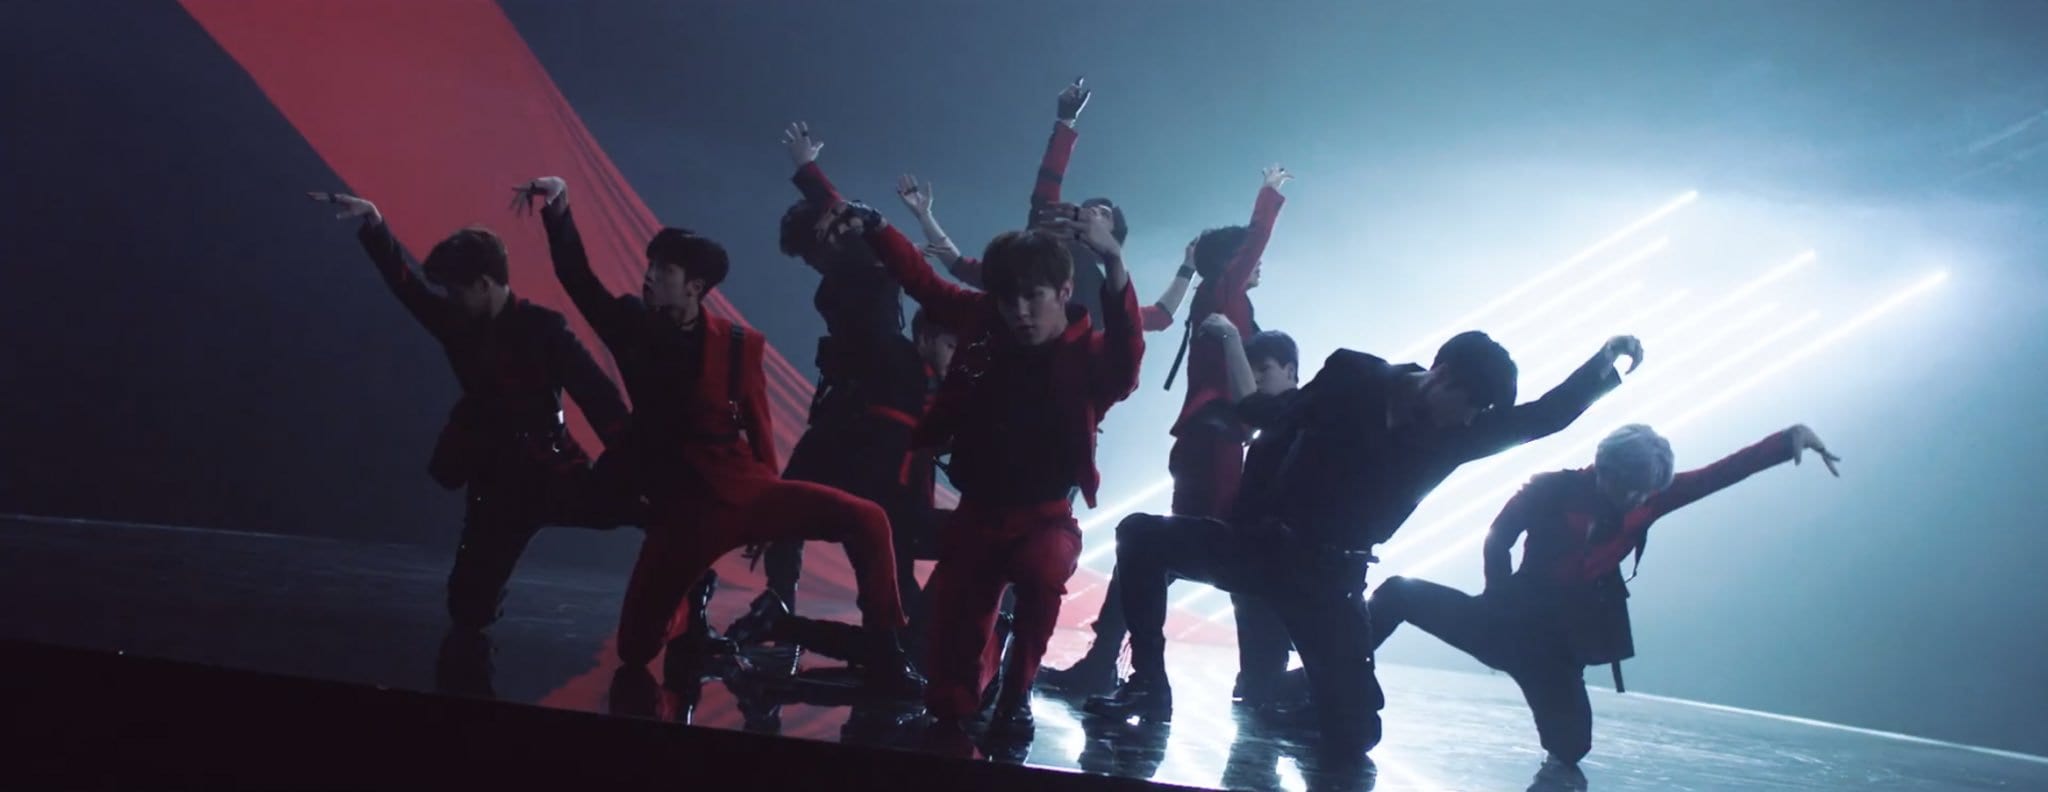 WATCH: PDX 101's Final Team X1 Makes Thrilling Debut With FLASH MV The Kpop